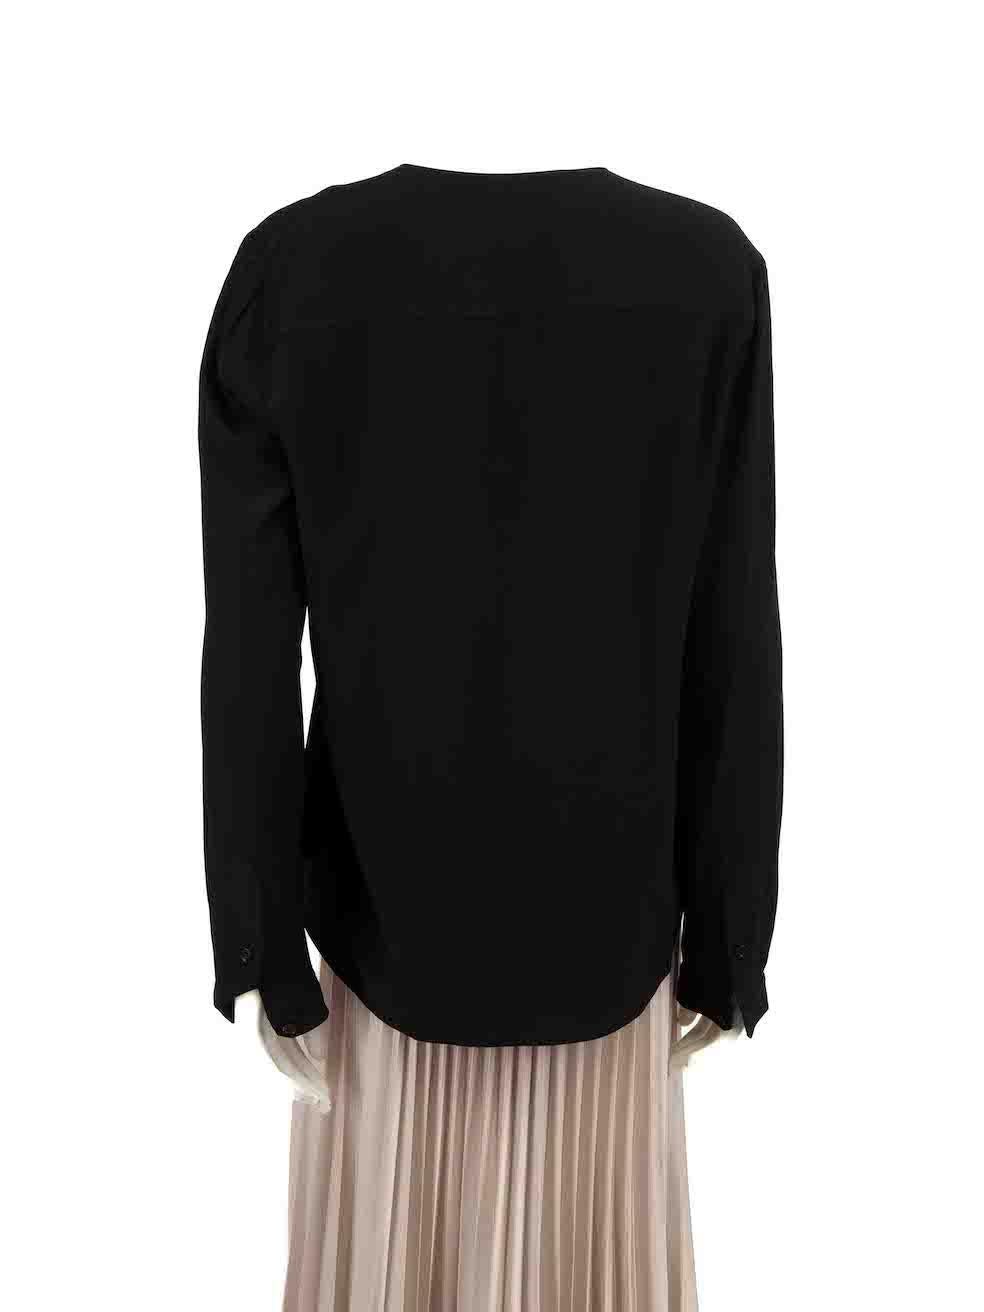 Stella McCartney Black Silk Contrast Collar Blouse Size XL In Good Condition For Sale In London, GB